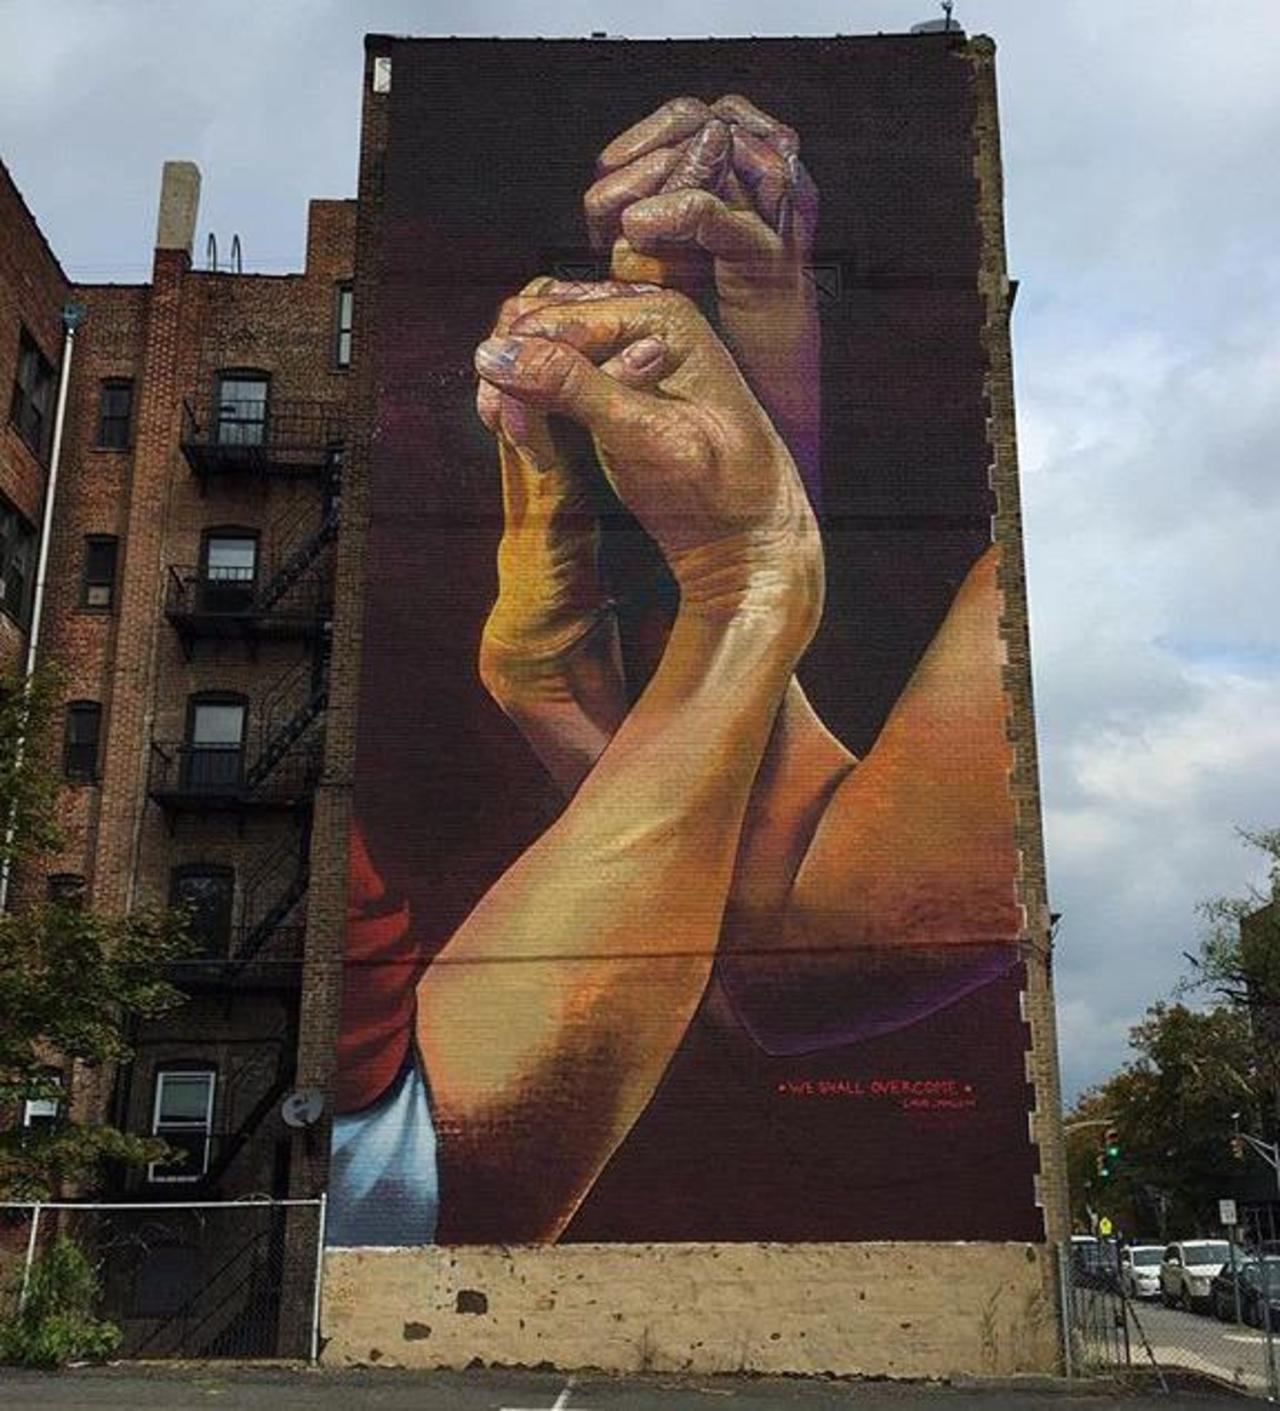 New Street Art by CaseMaclaim in Jersey City for the TheBKcollective 

#art #graffiti #mural #streetart http://t.co/rW9b1XcXB9